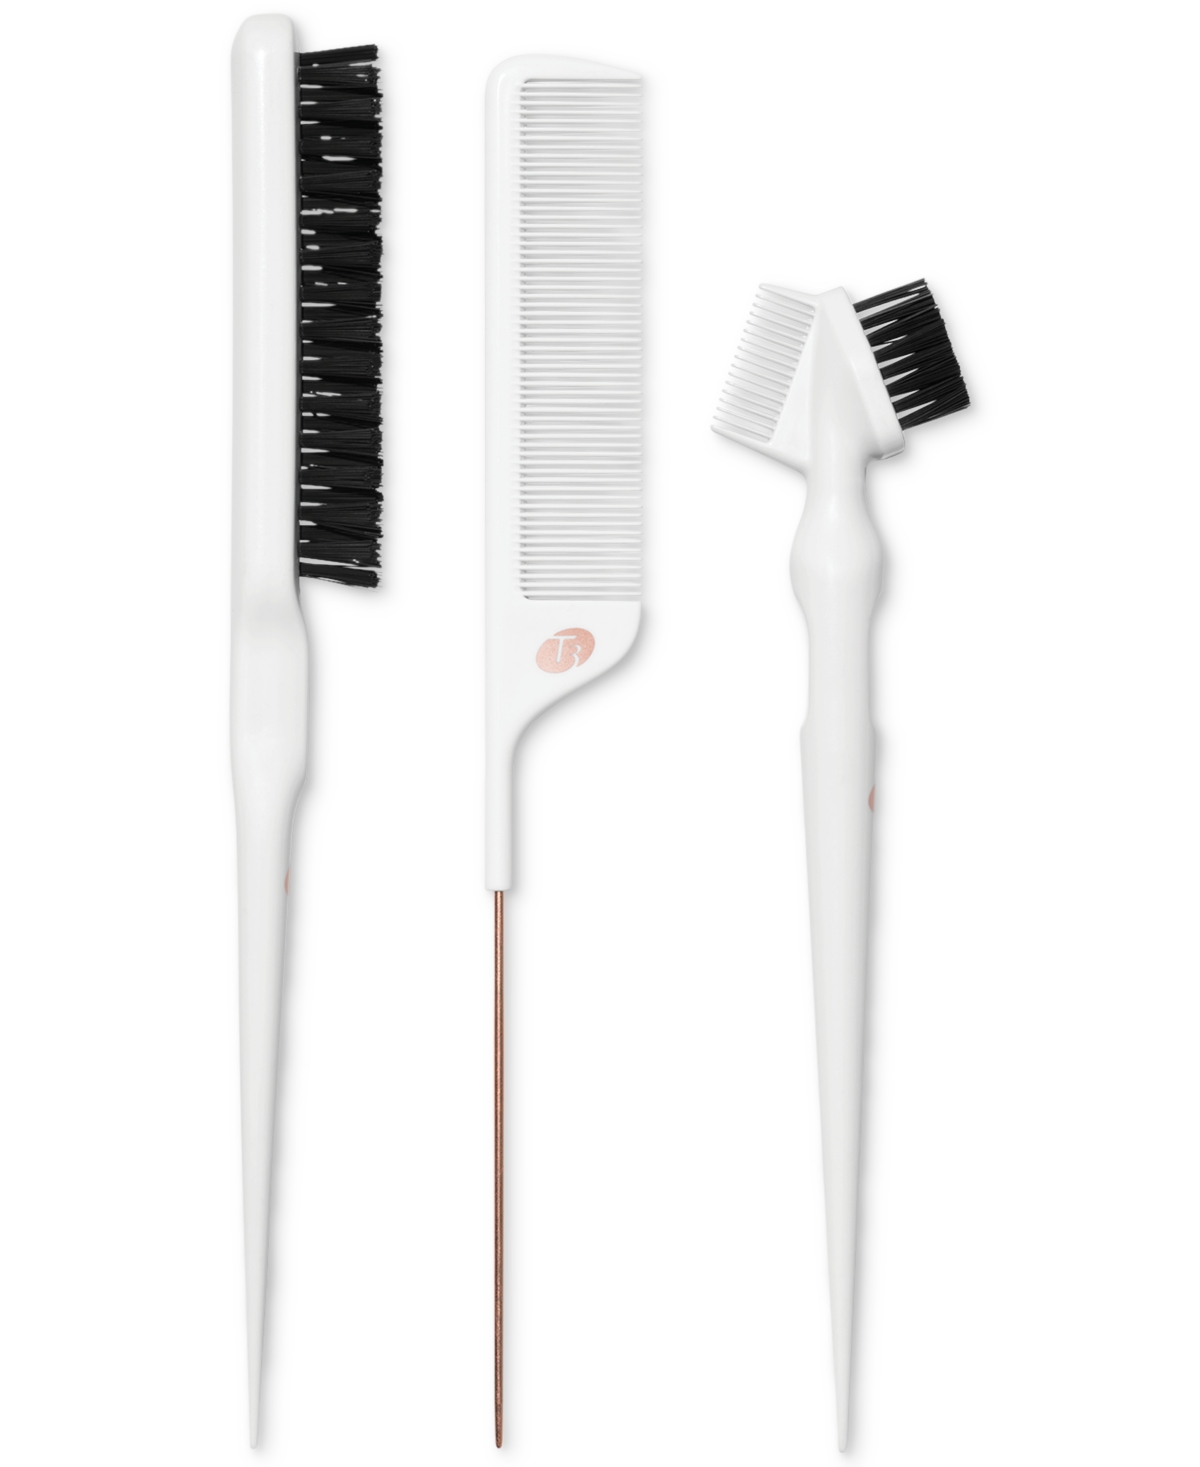 Detail Set with Pintail Comb, Edge Brush, and Teasing Brush, 3 Piece